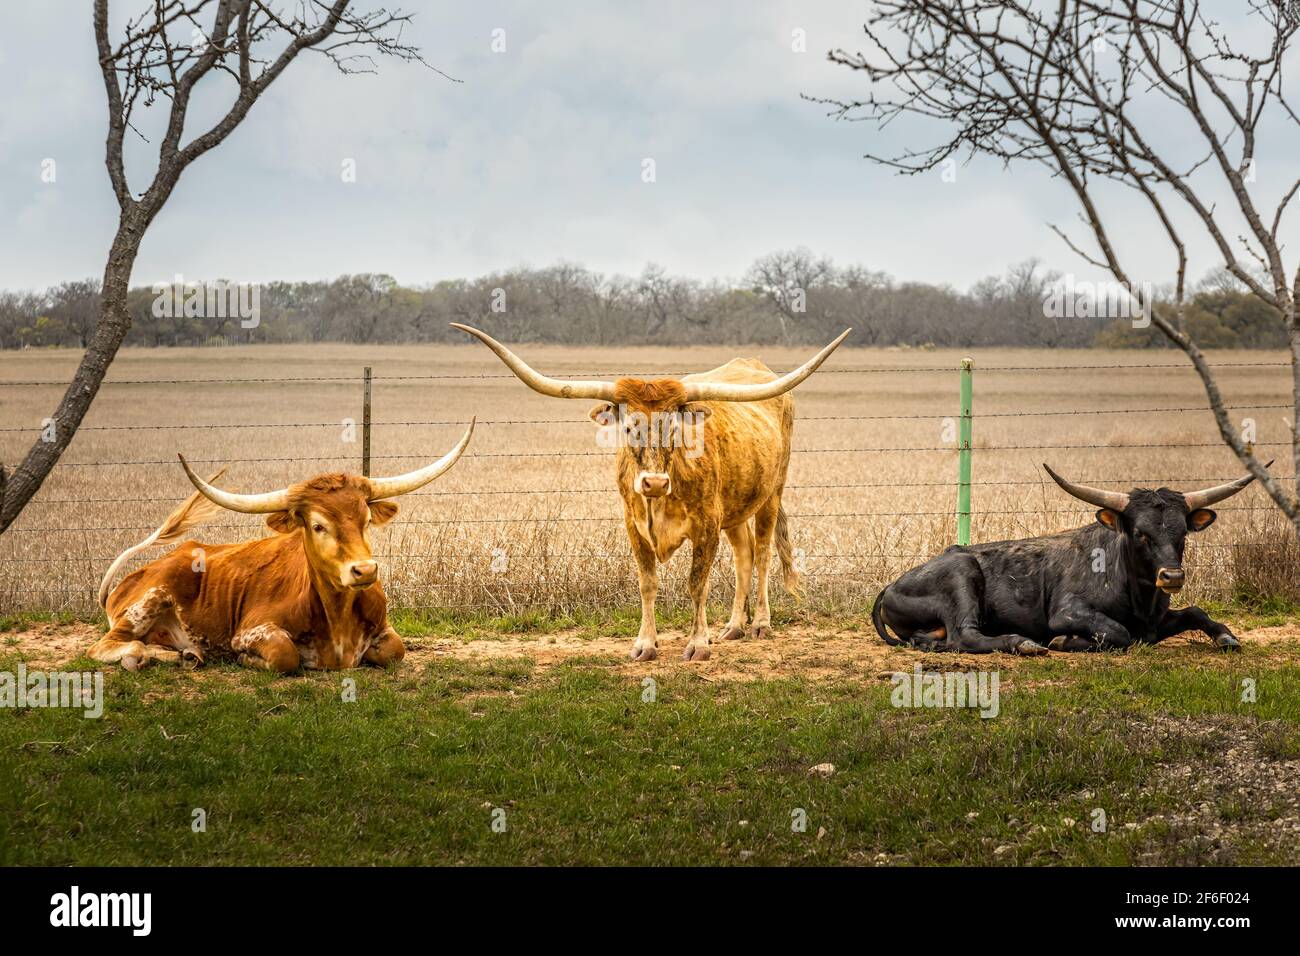 Texas Longhorn catlle standing outdoors besides a field in the Texas Hill Country Stock Photo